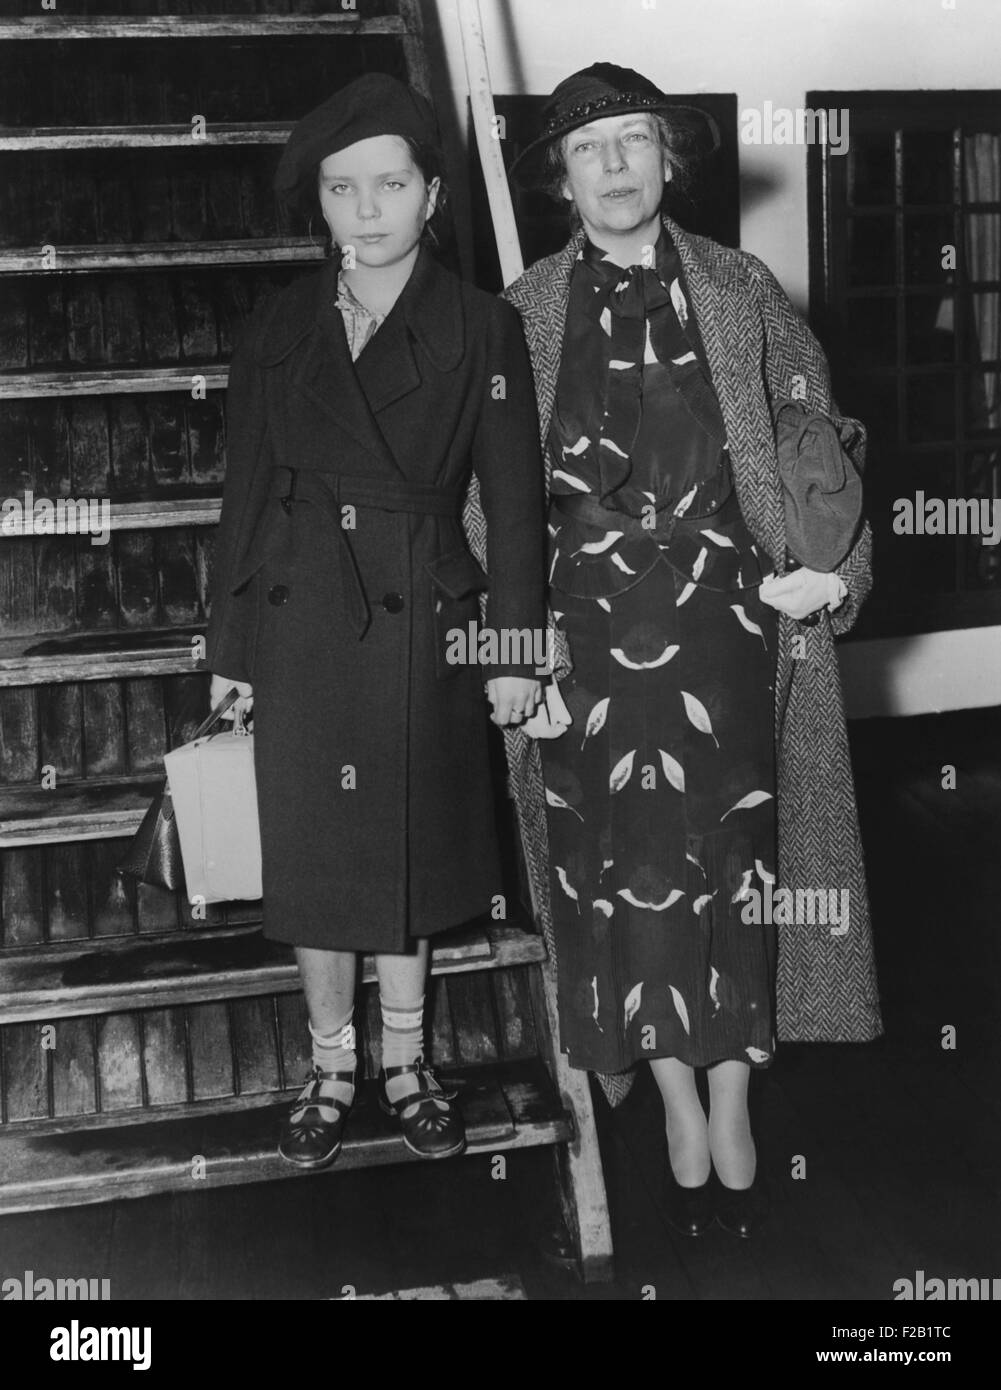 Alice Roosevelt Longworth, arriving in NYC from France, Sept. 5, 1935. She and her 10 year old daughter, Paulina Longworth, attended the wedding of her nephew Count Rene de Chambrun, to Mlle. Josee Laval, daughter of the French Premier, Pierre Laval. (CSU 2015 8 595) Stock Photo